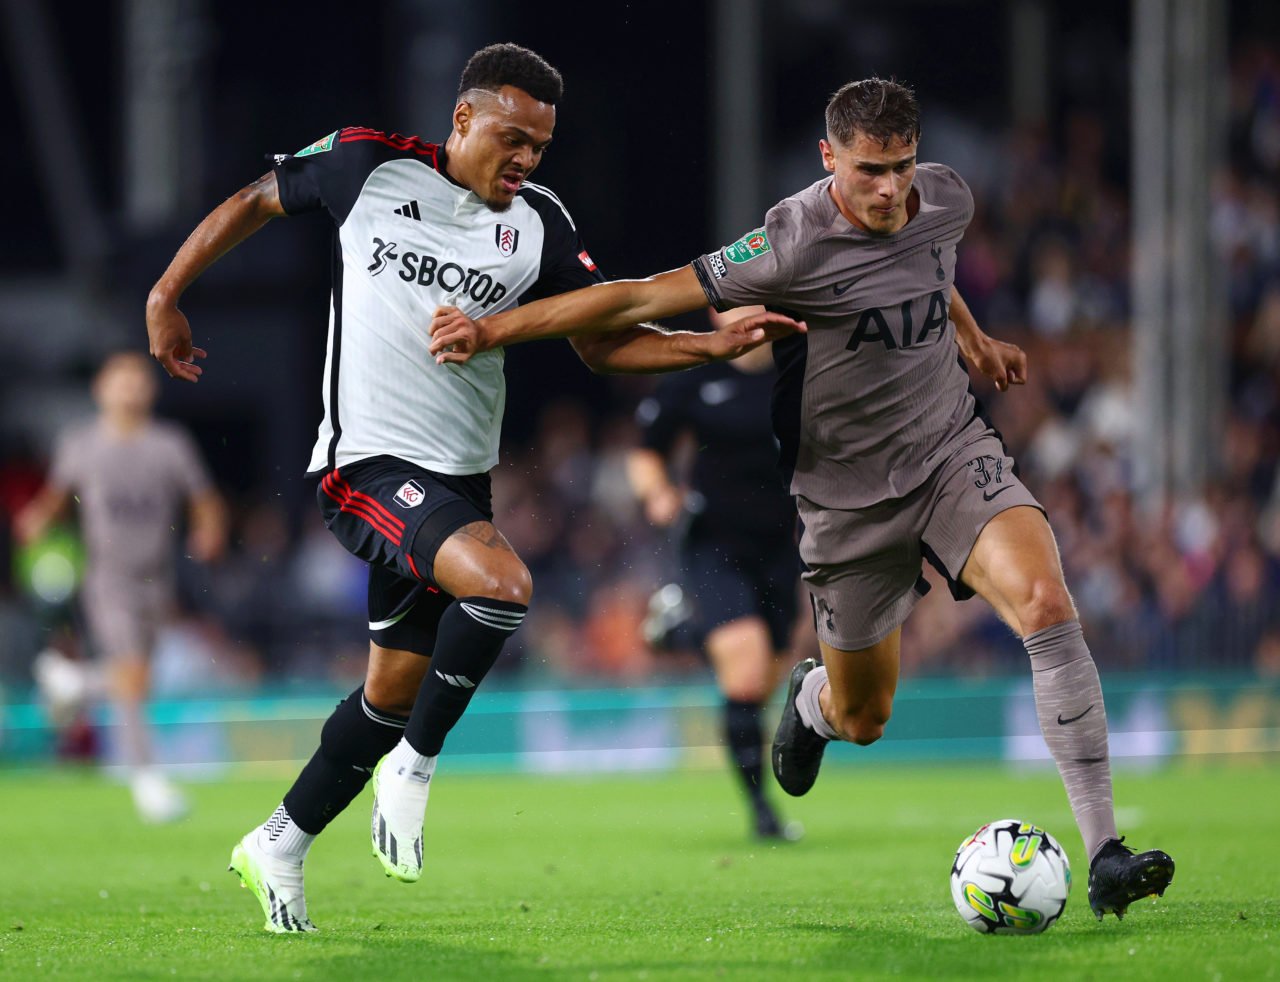 Fulham vs Tottenham LIVE commentary: Spurs aim to continue impressive start  as rivals meet in Carabao Cup - kick-off time, team news and how to follow